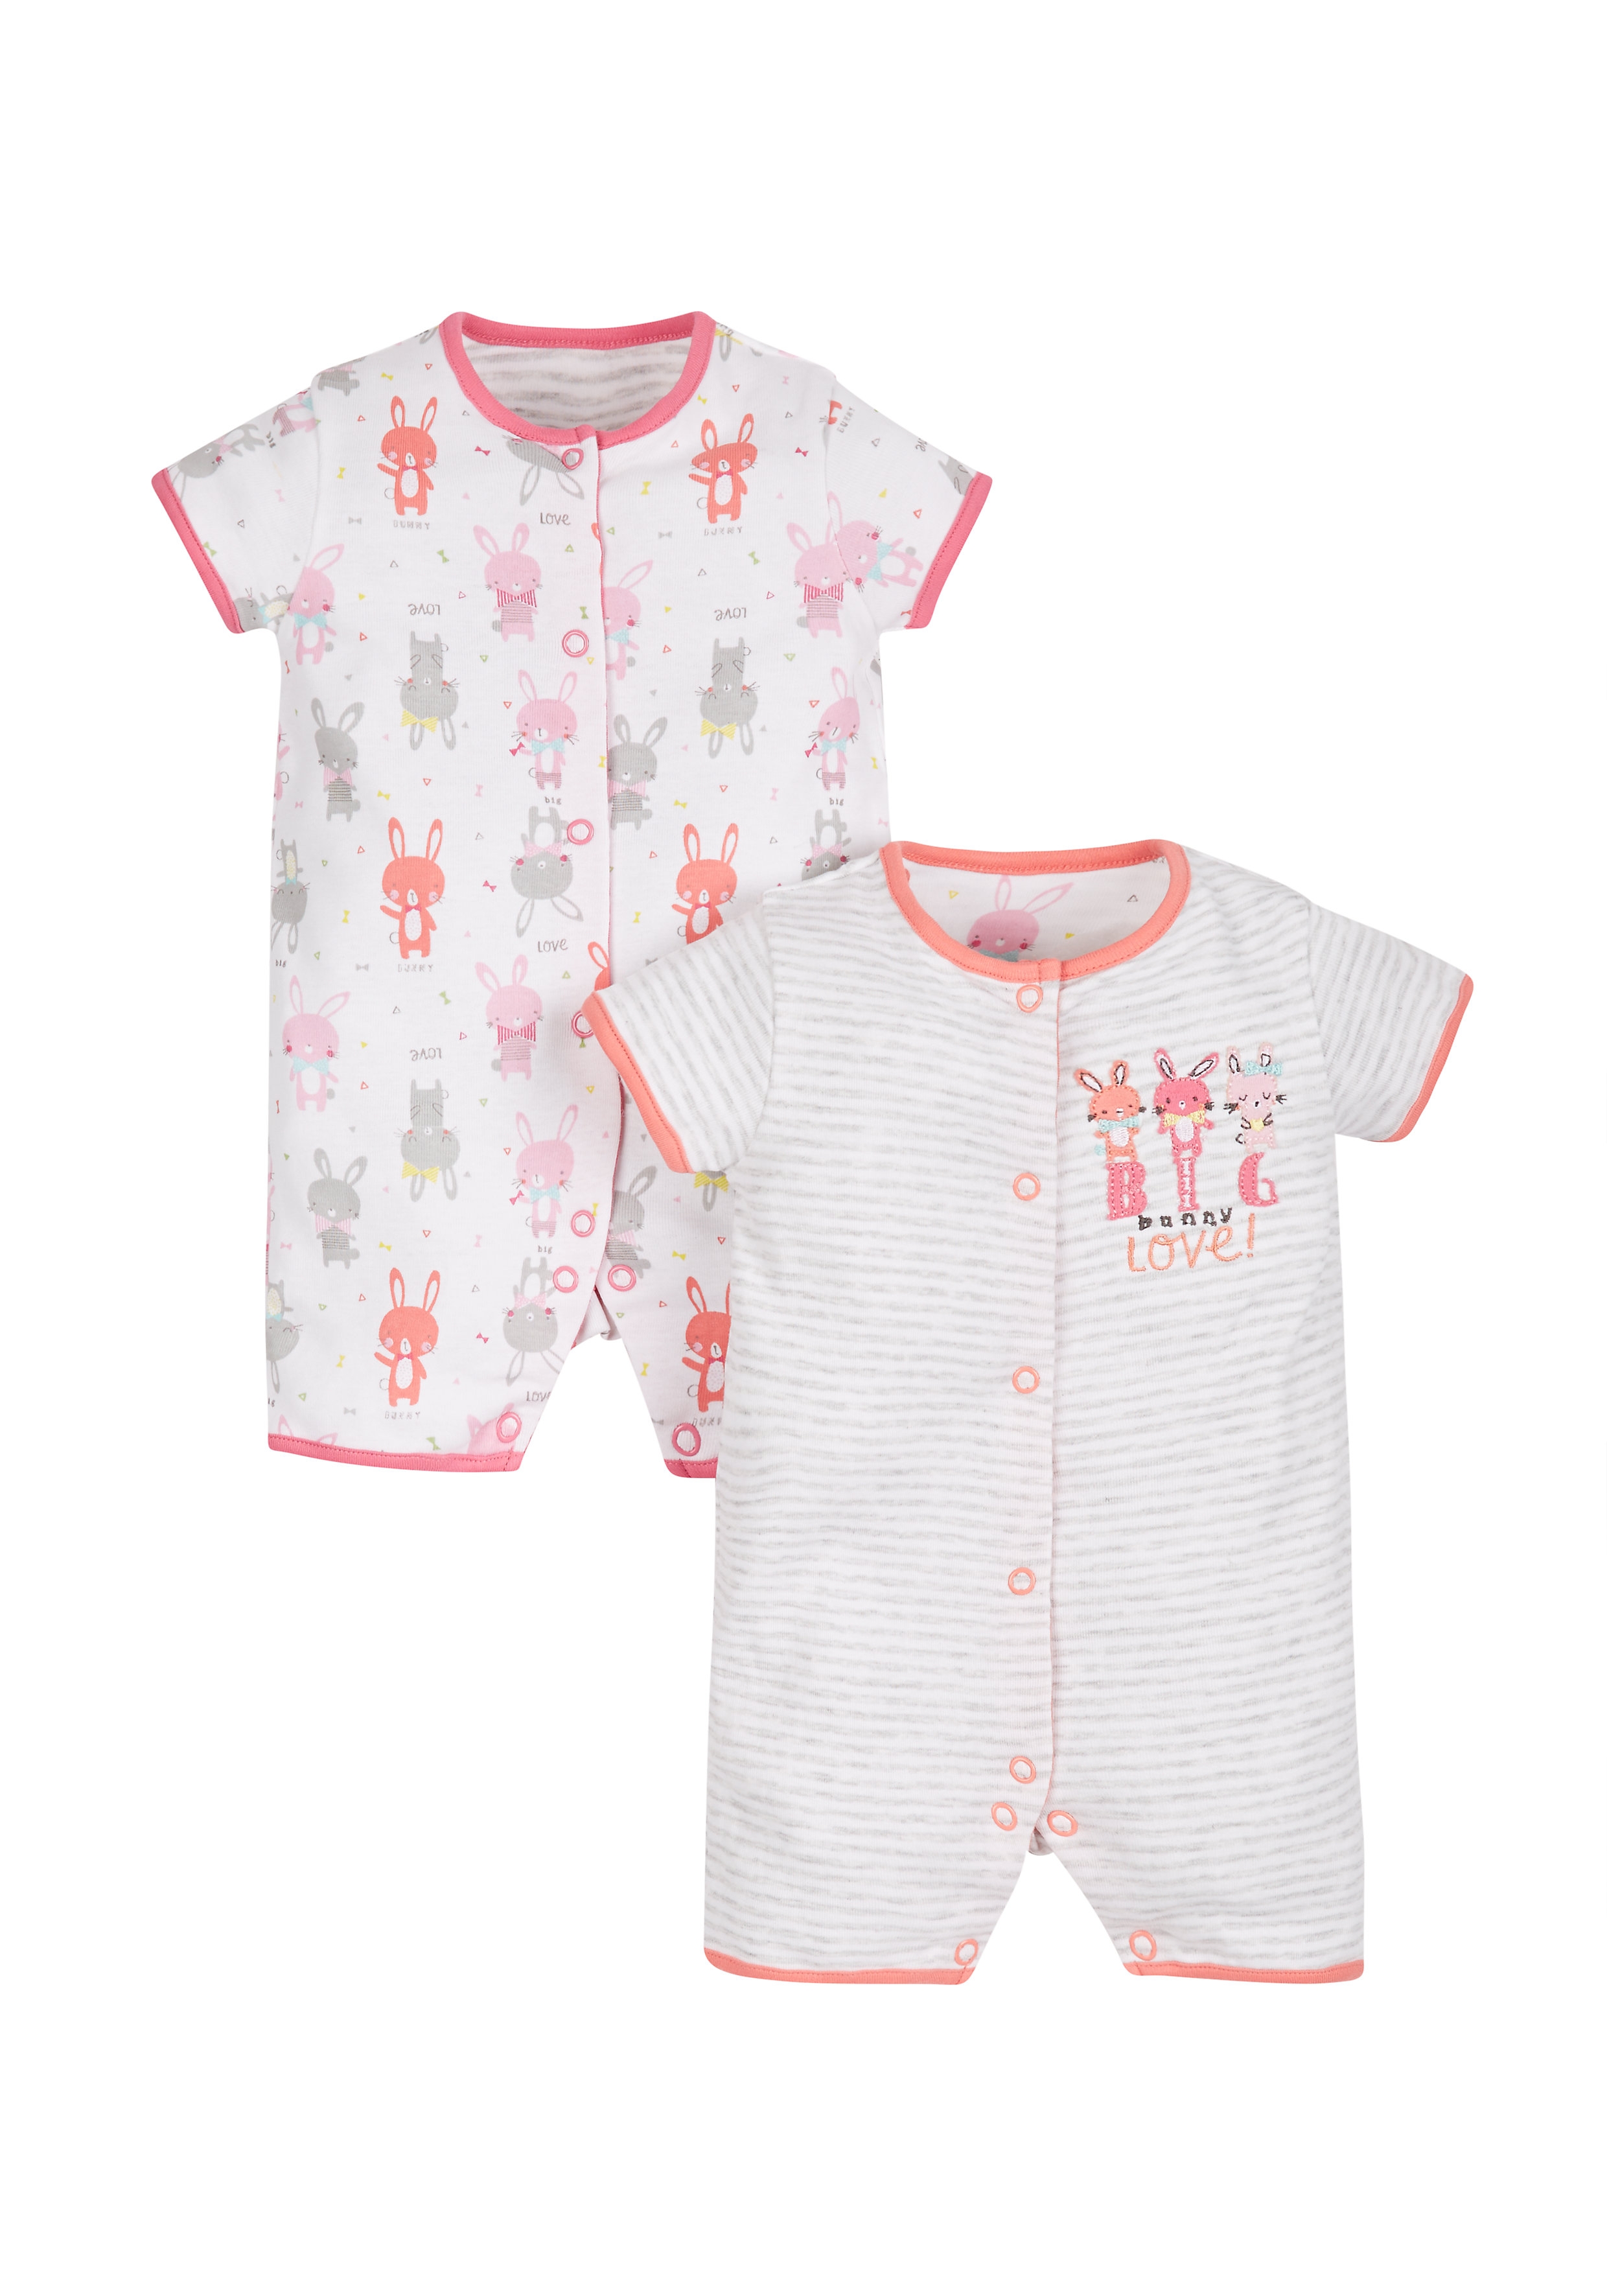 Girls Big Love Bunny Rompers - Pack Of 2